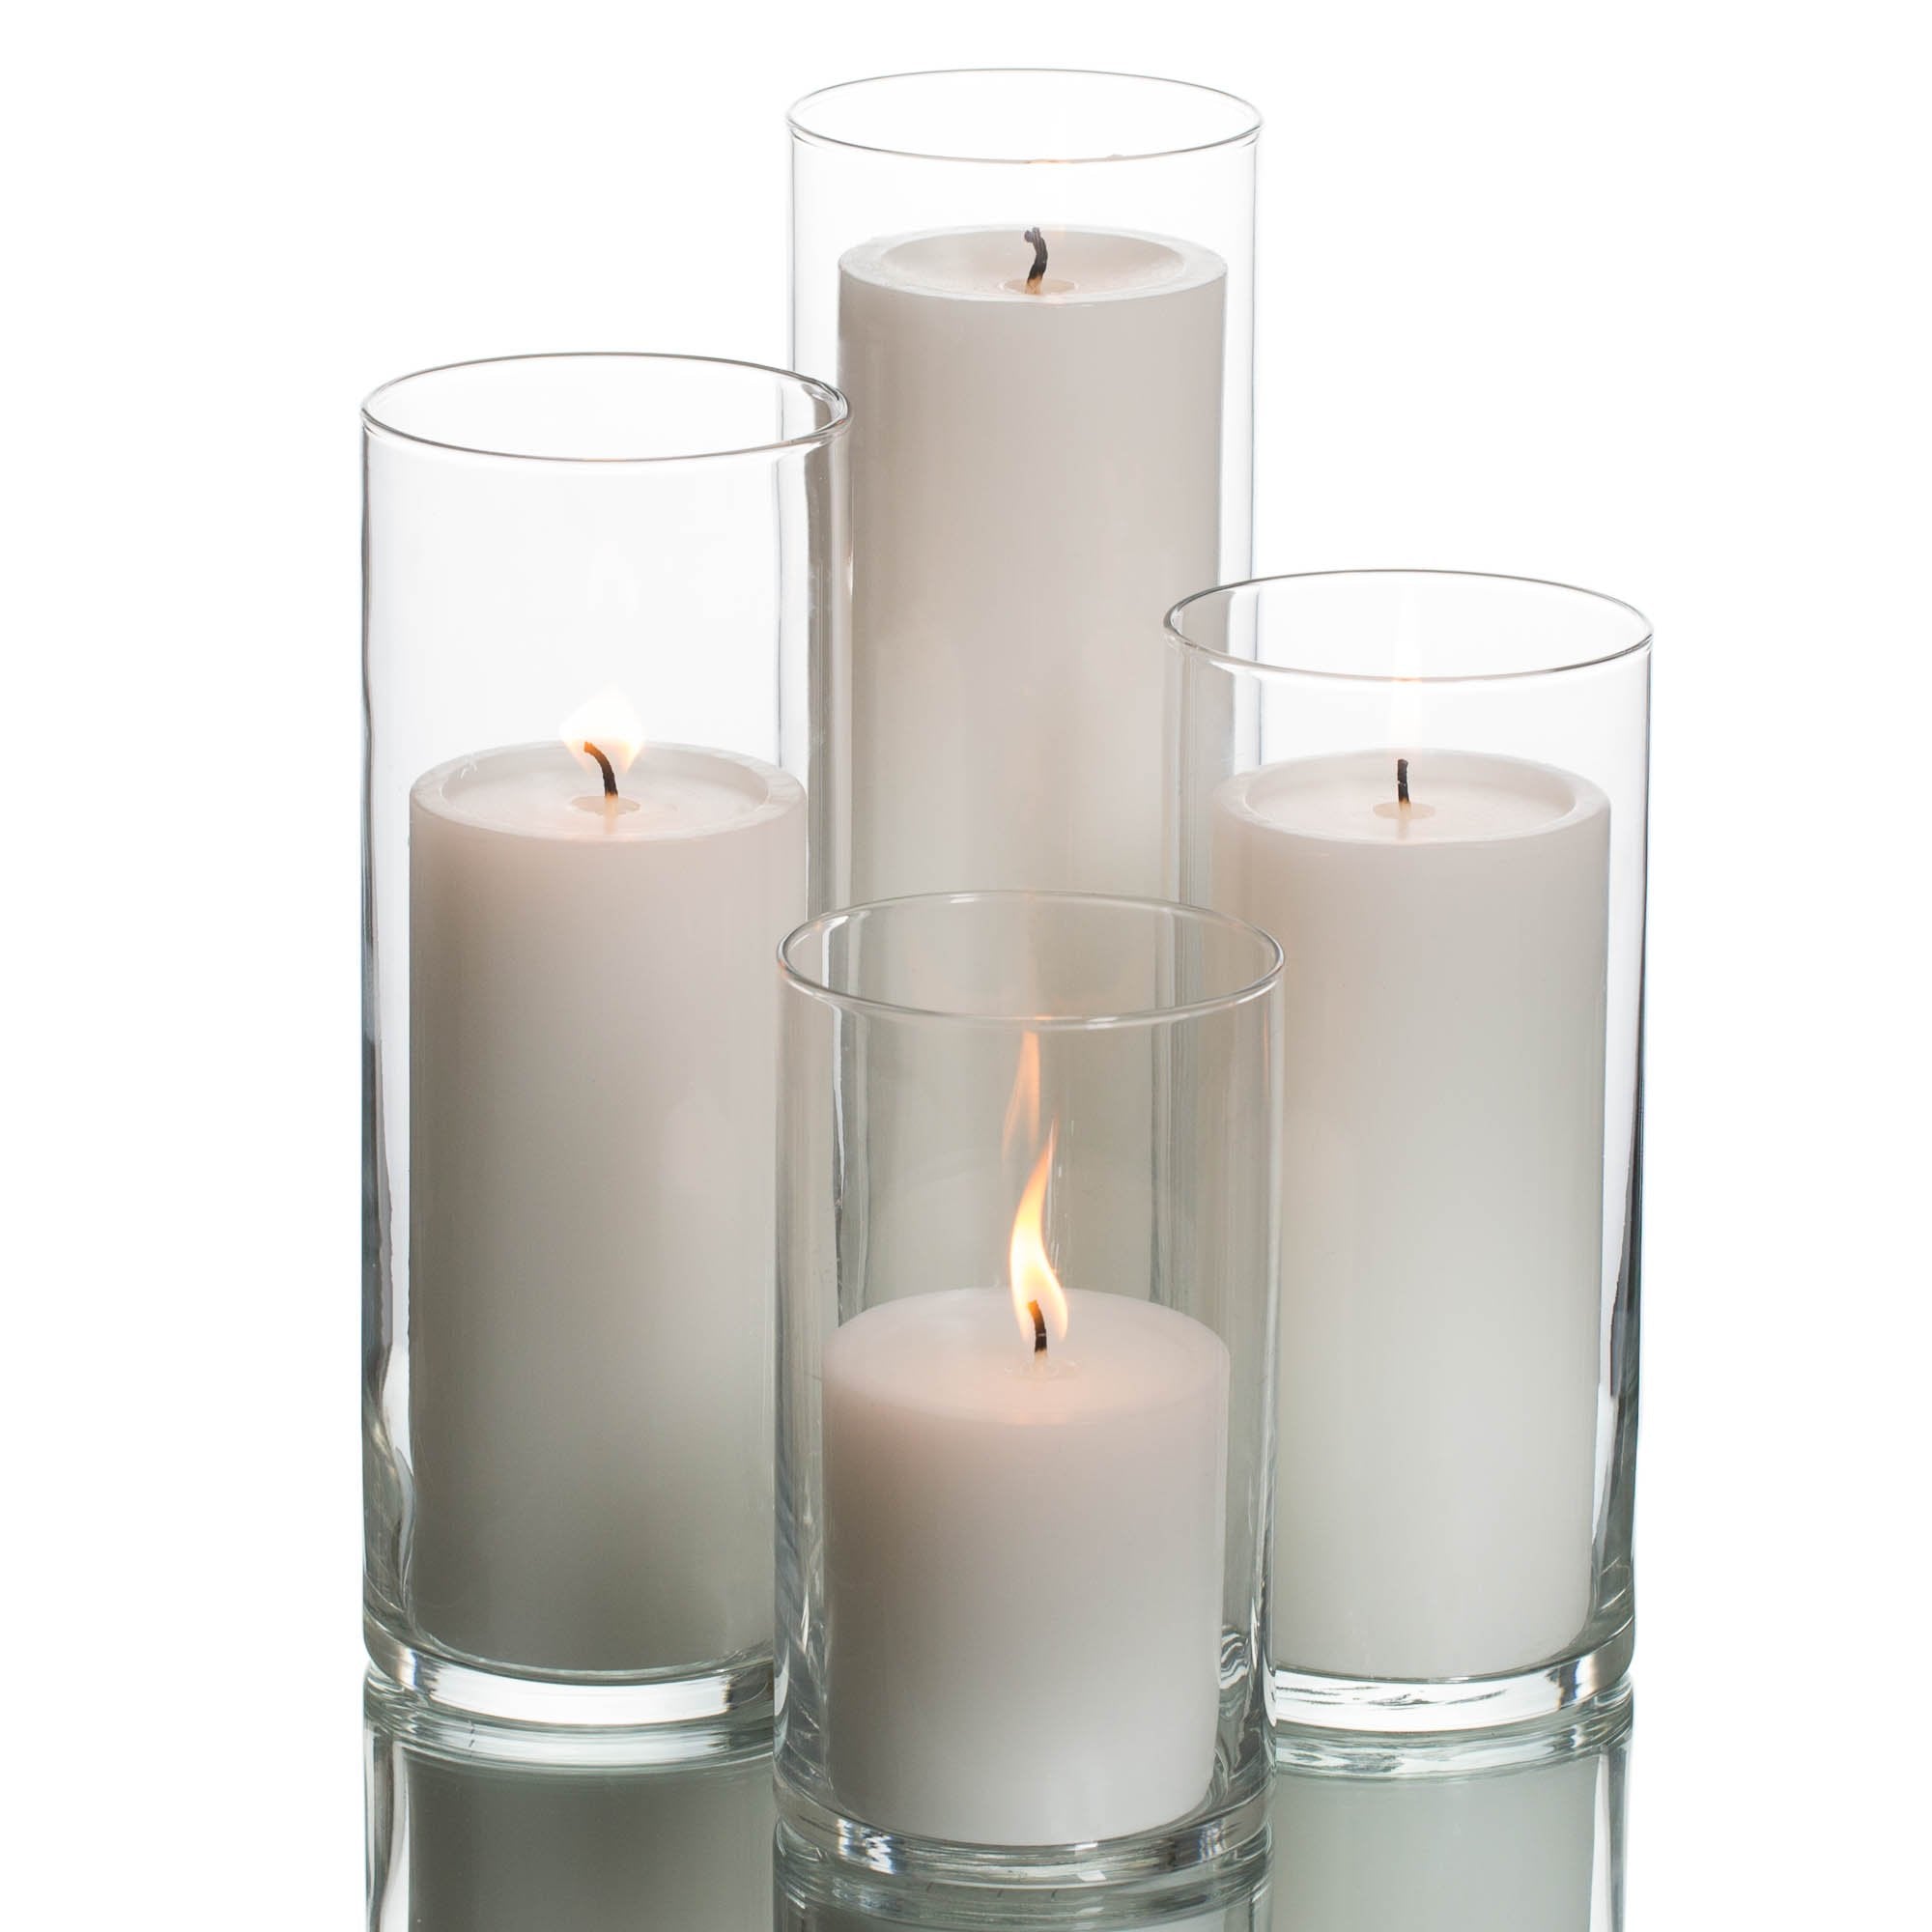 What is a Votive Candle?